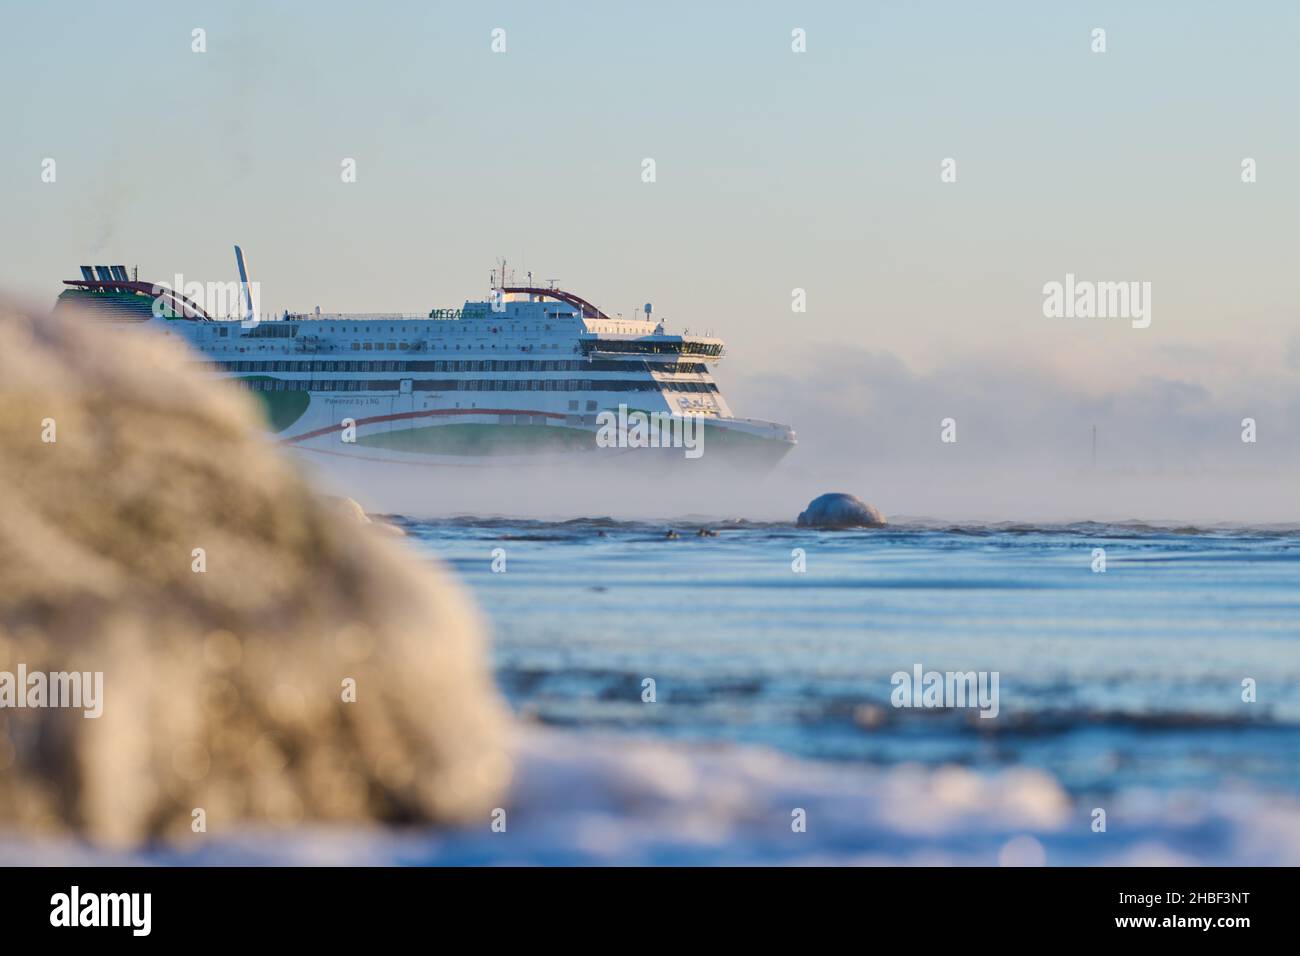 Helsinki, Finland - December 5, 2021: Tallink M/S Megastar ferry departing to Tallinn from Helsinki in extremely cold winter conditions. Stock Photo